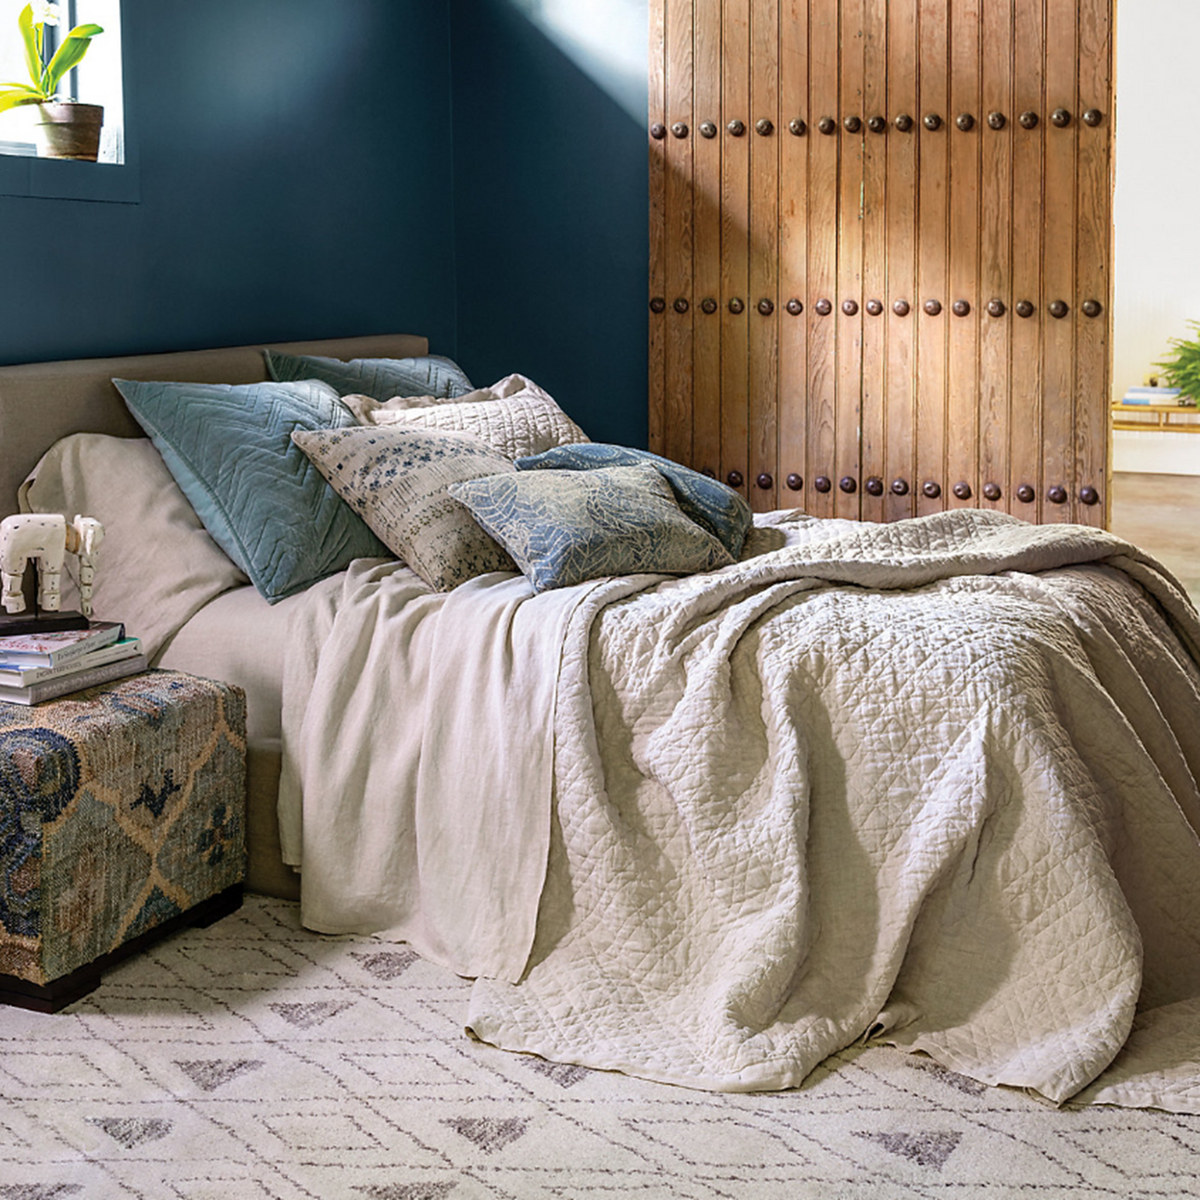 Lifestyle Image of Pine Cone Hill Washed Linen Quilted Bedding in Natural Color